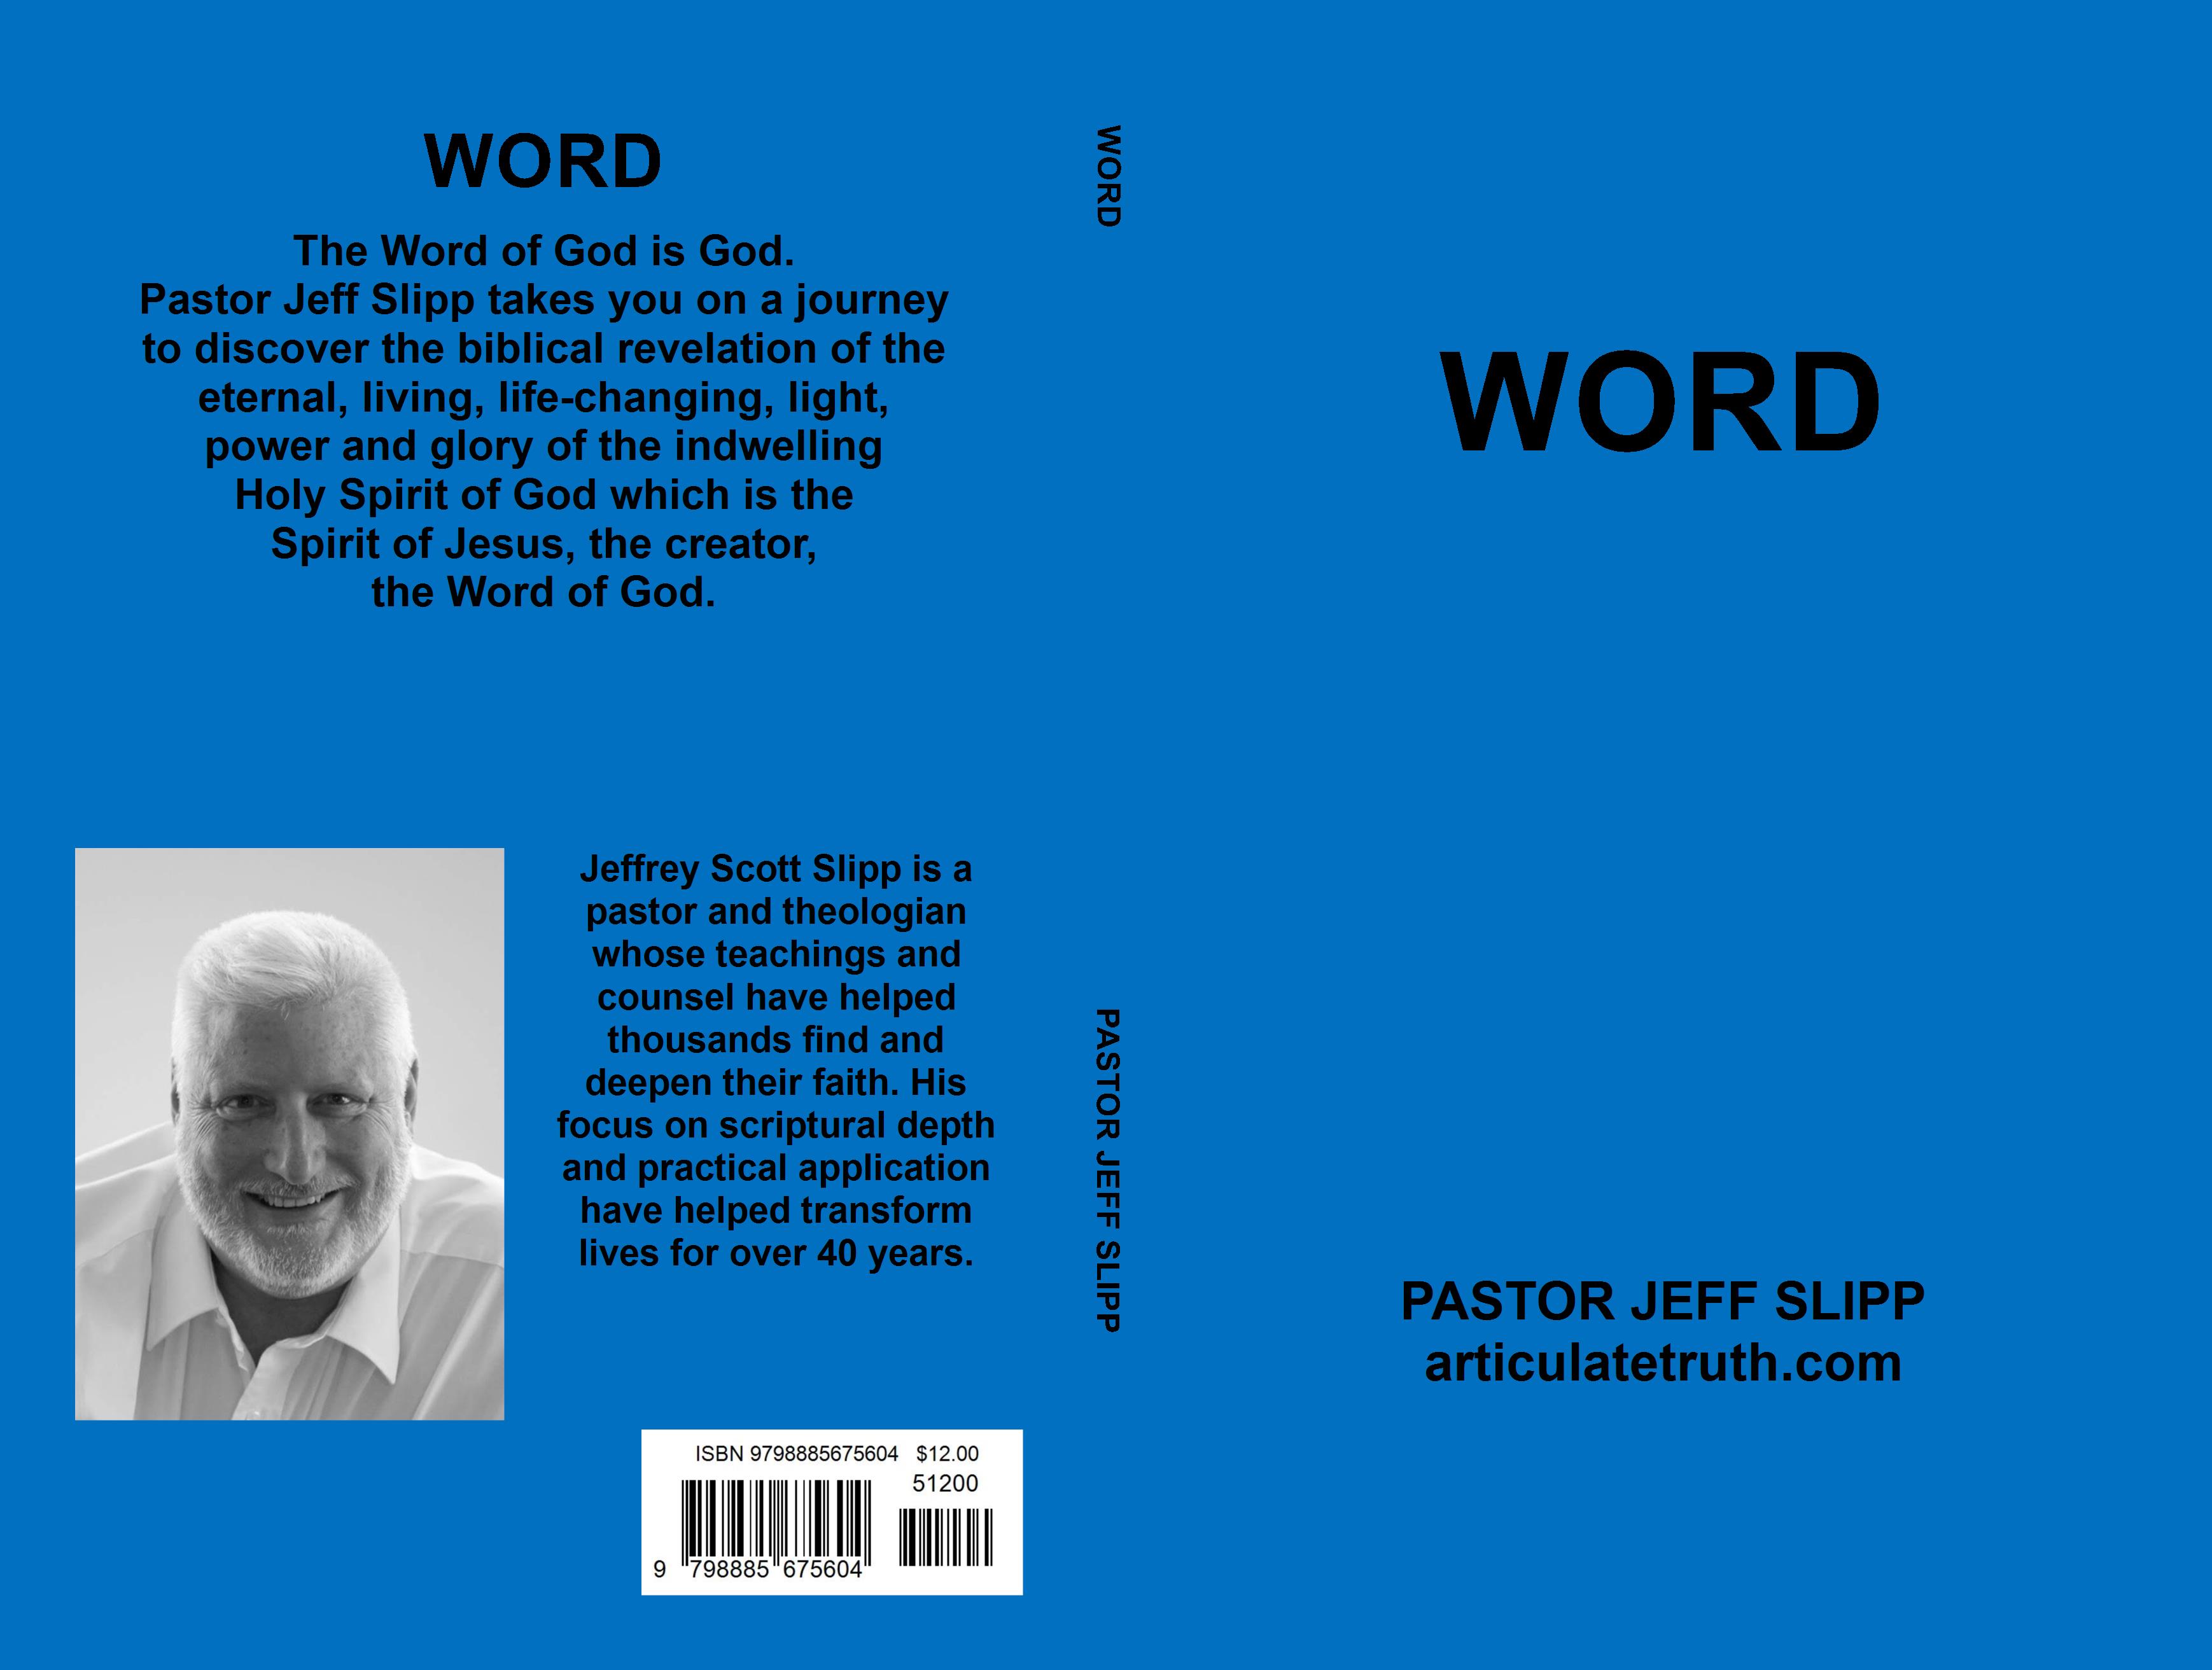 WORD cover image